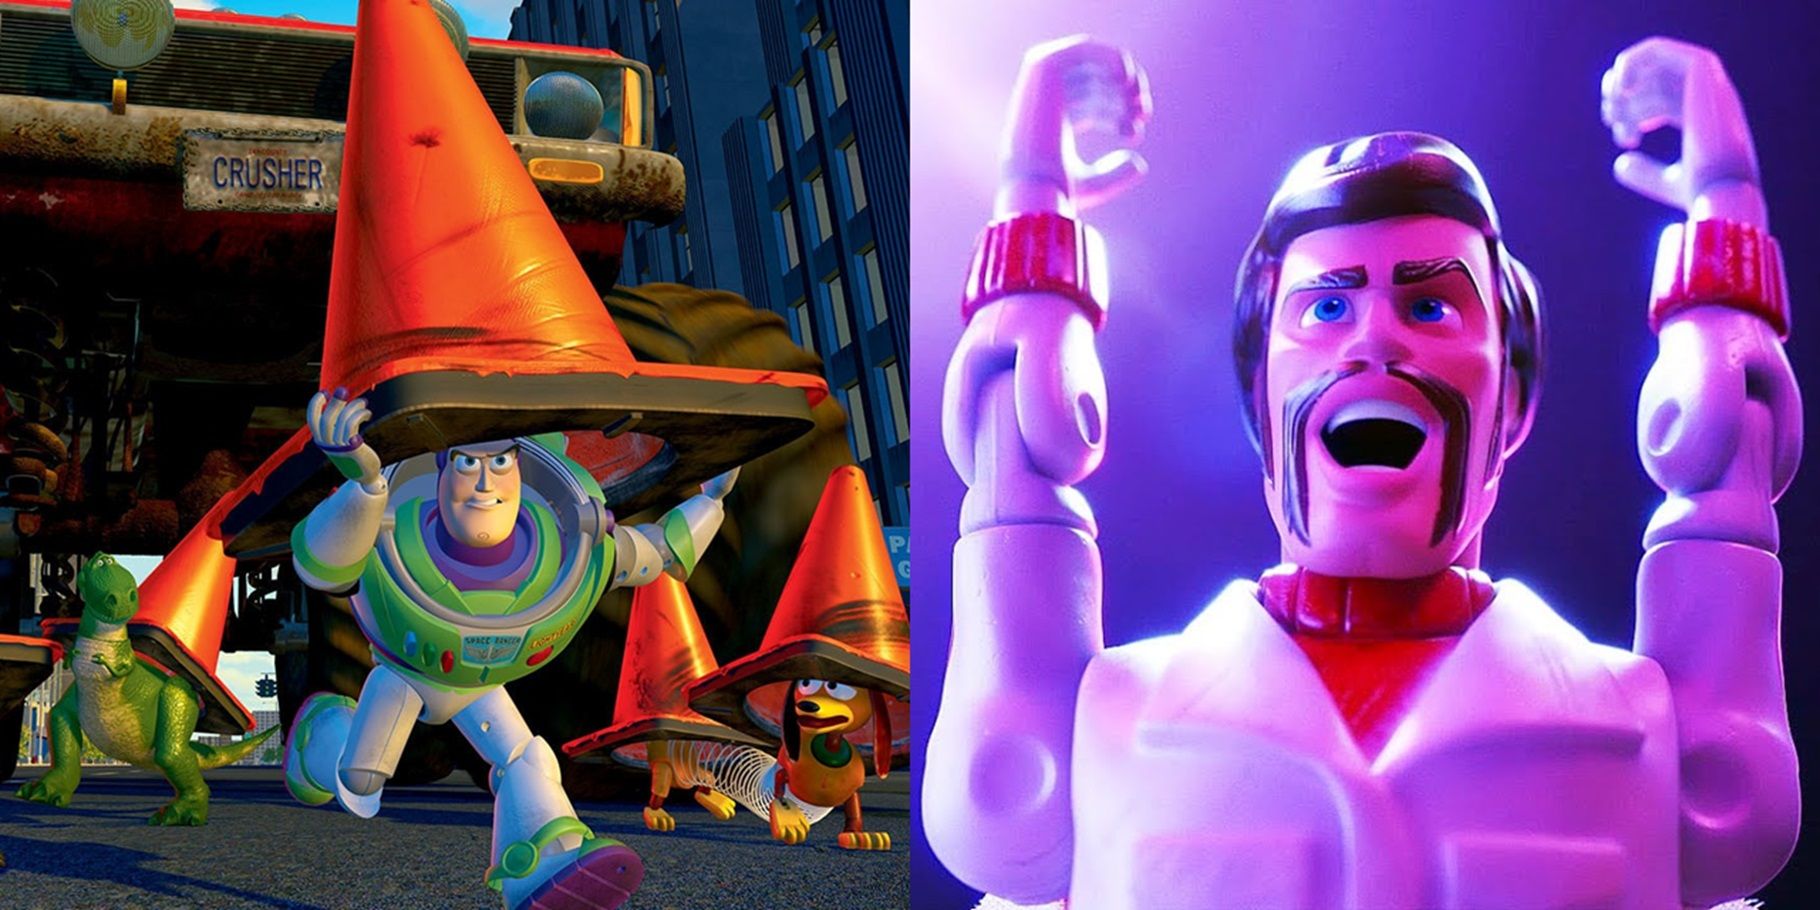 Toy Story The 10 Funniest Scenes From The Franchise Ranked